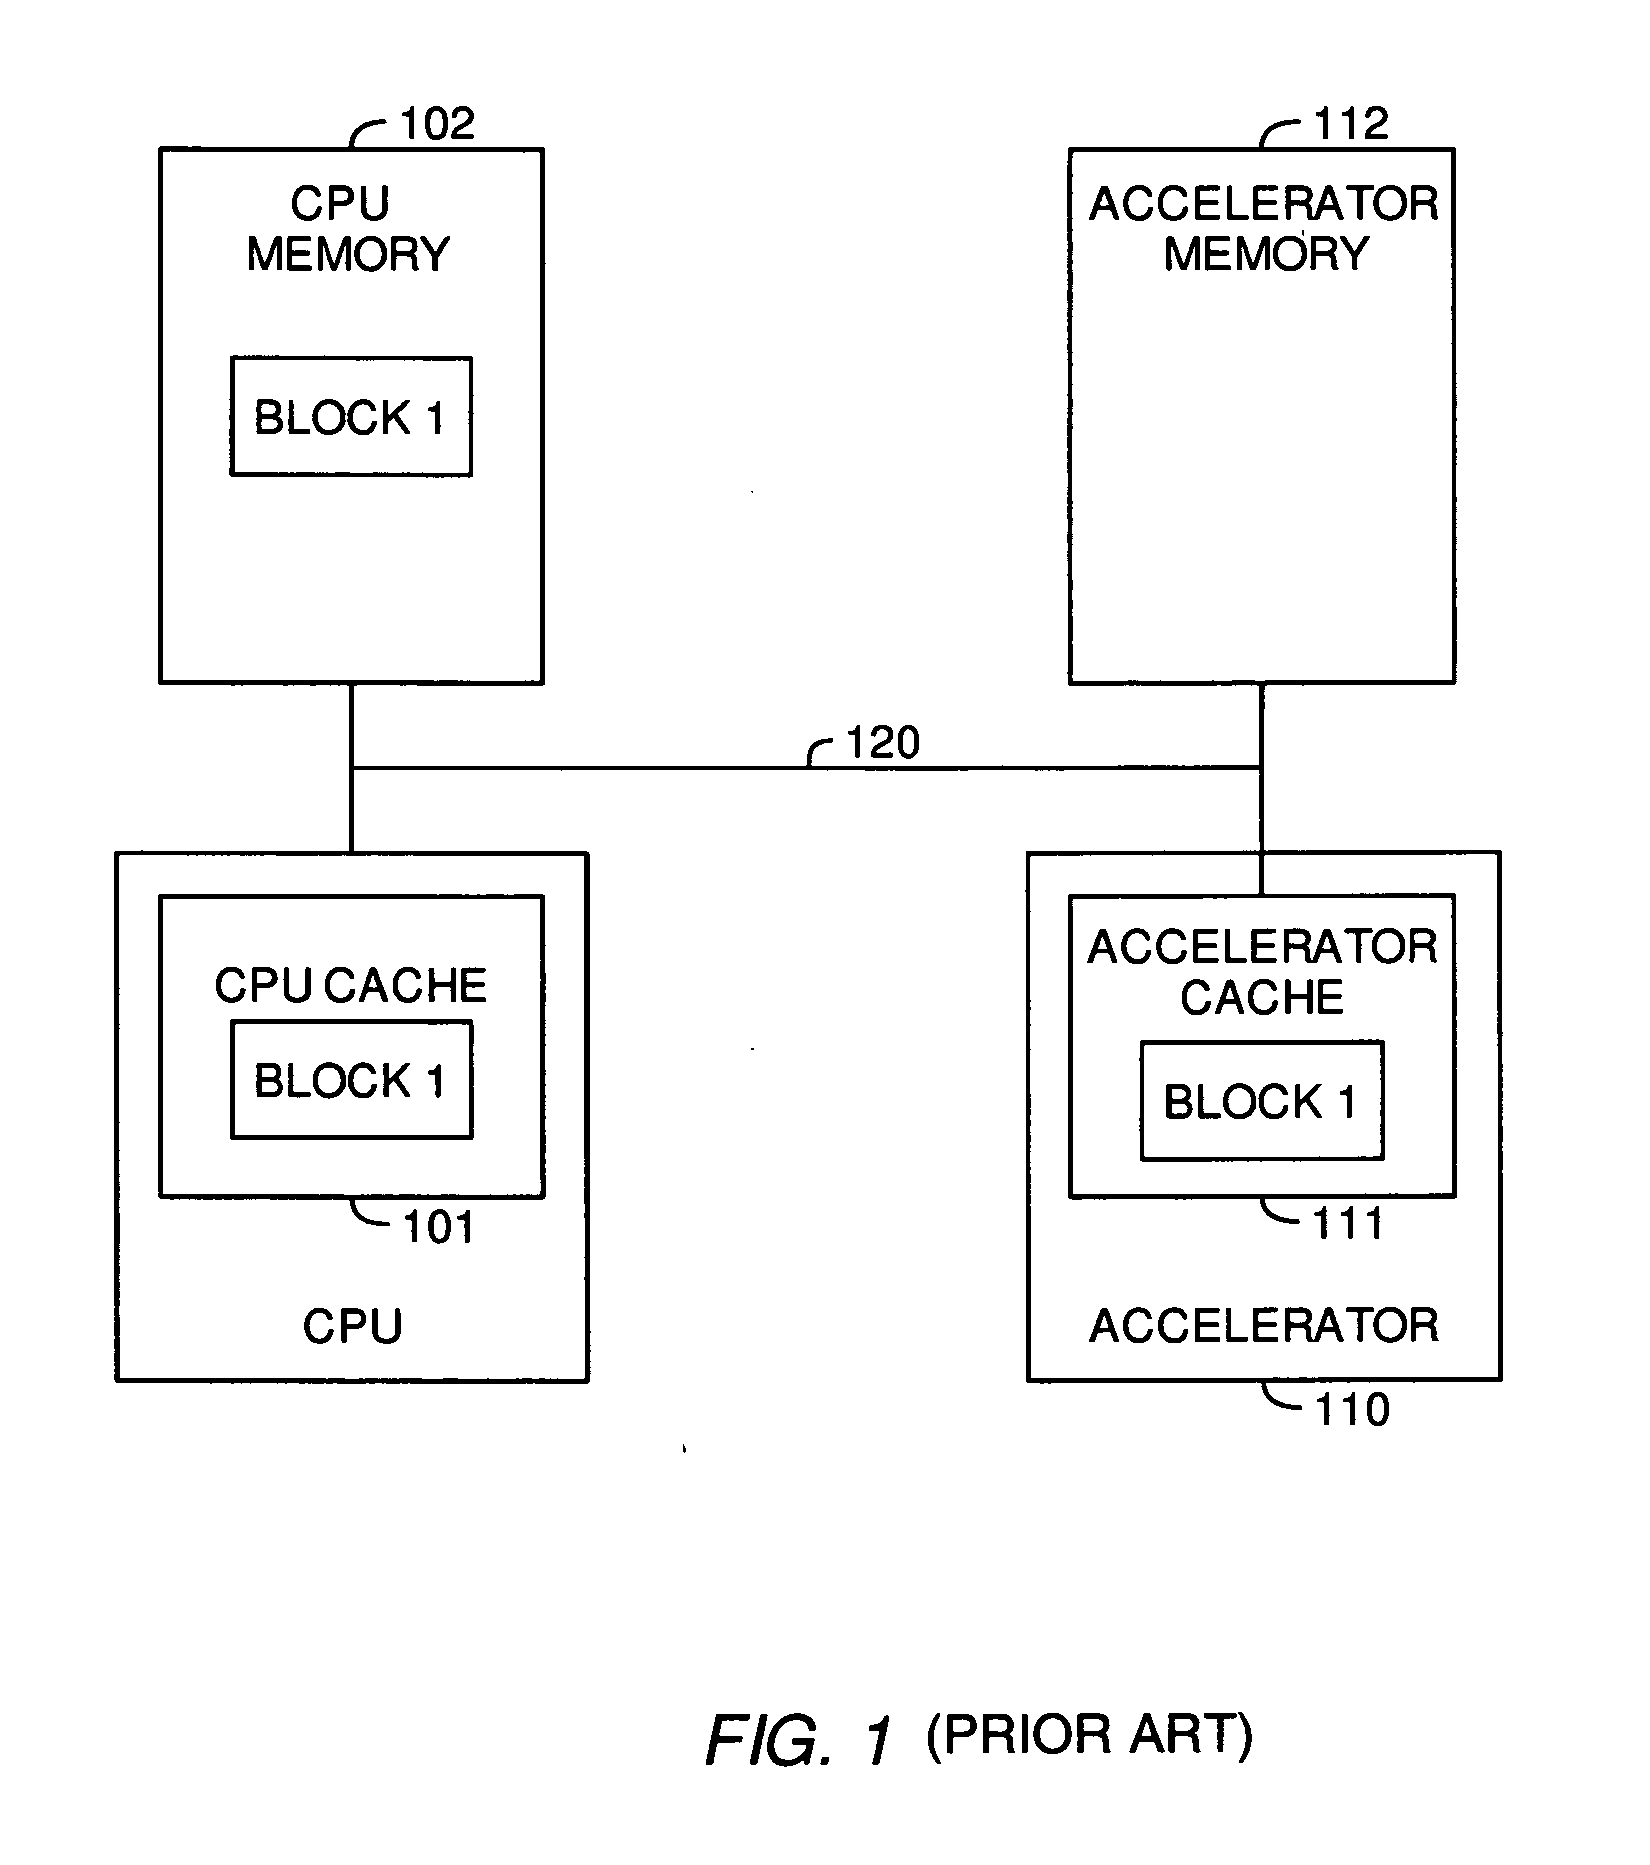 Low-cost cache coherency for accelerators